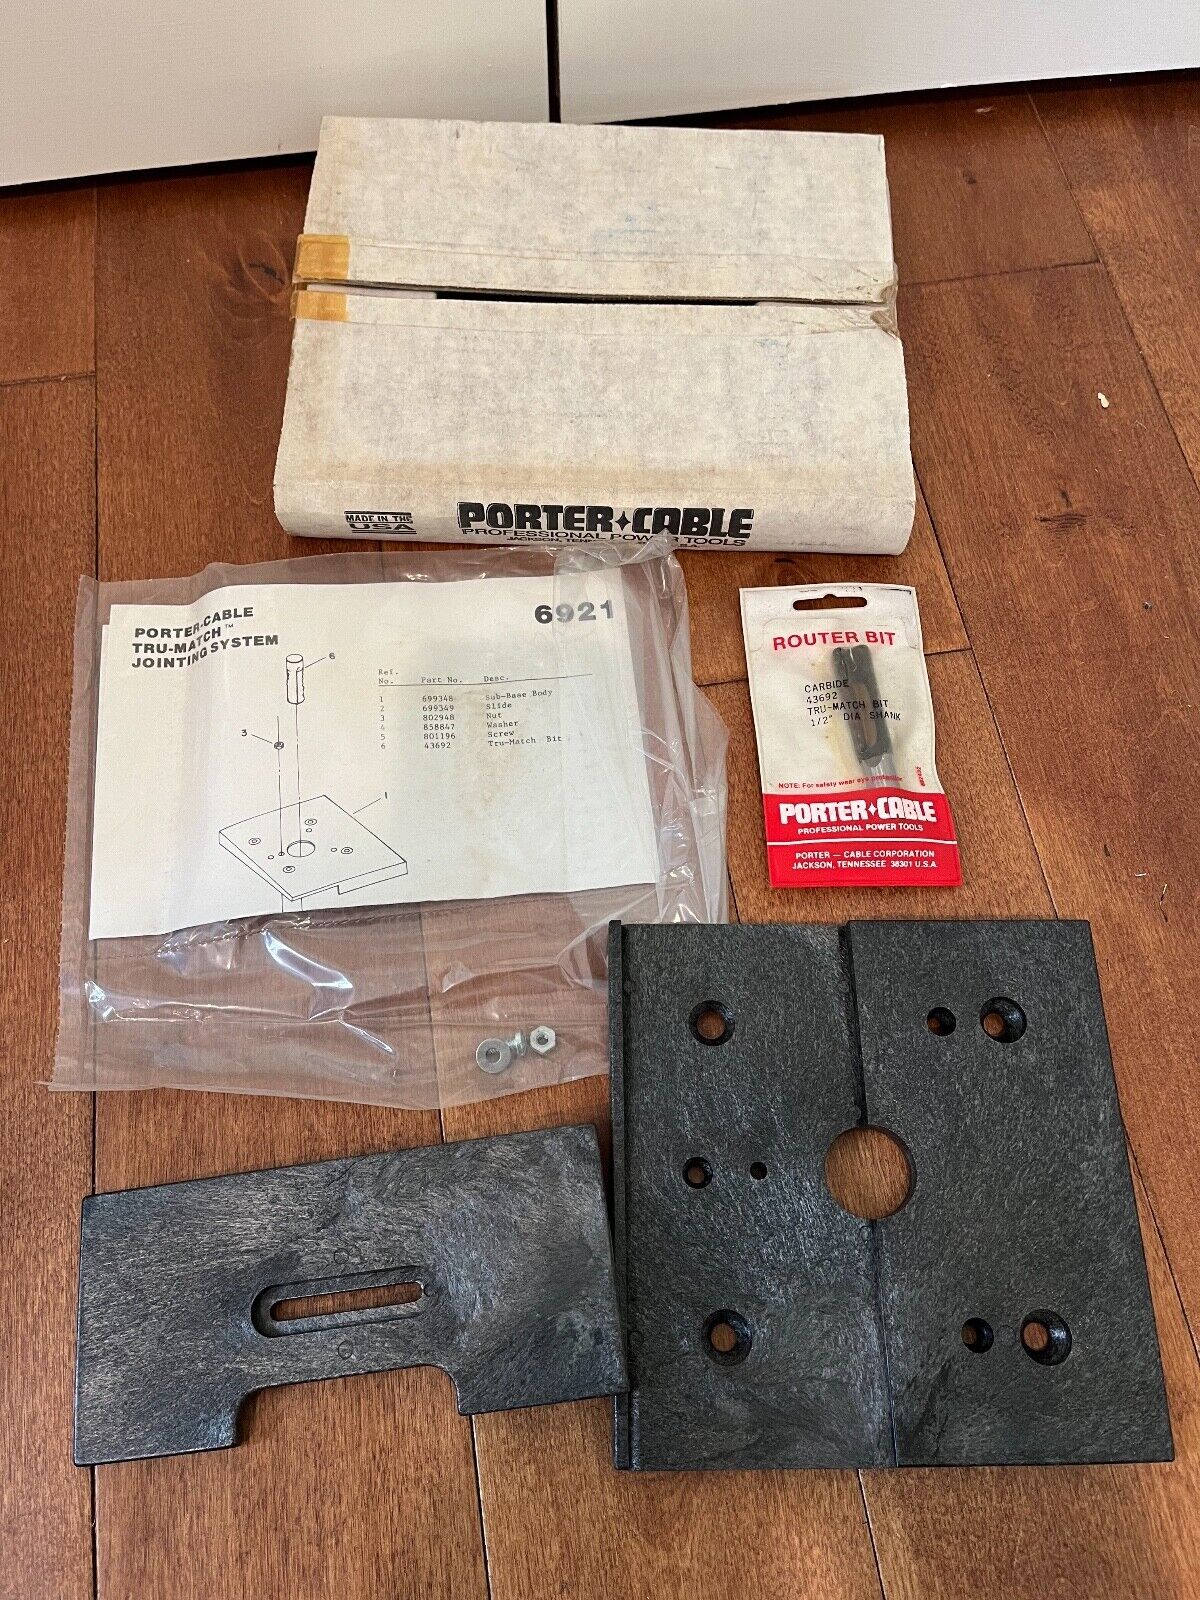 PORTER CABLE TRU-MATCH ROUTER EDGE JOINTING KIT SYSTEM, BASE & BIT # 6921 USA